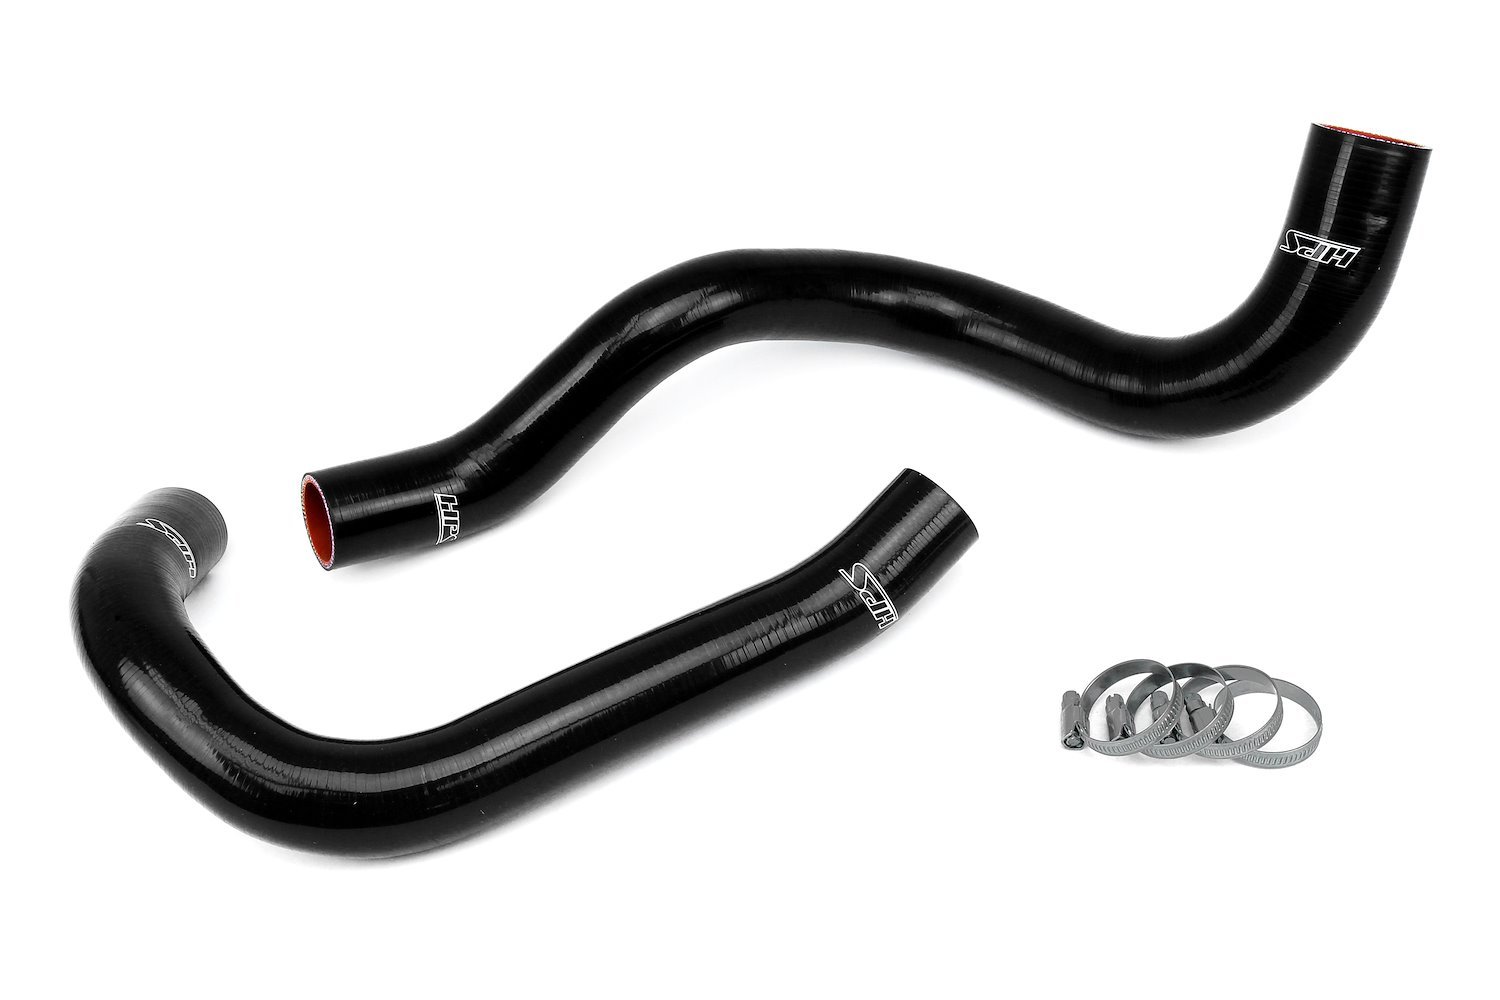 57-1834-BLK Radiator Hose Kit, 3-Ply Reinforced Silicone, Replaces Rubber Radiator Coolant Hoses